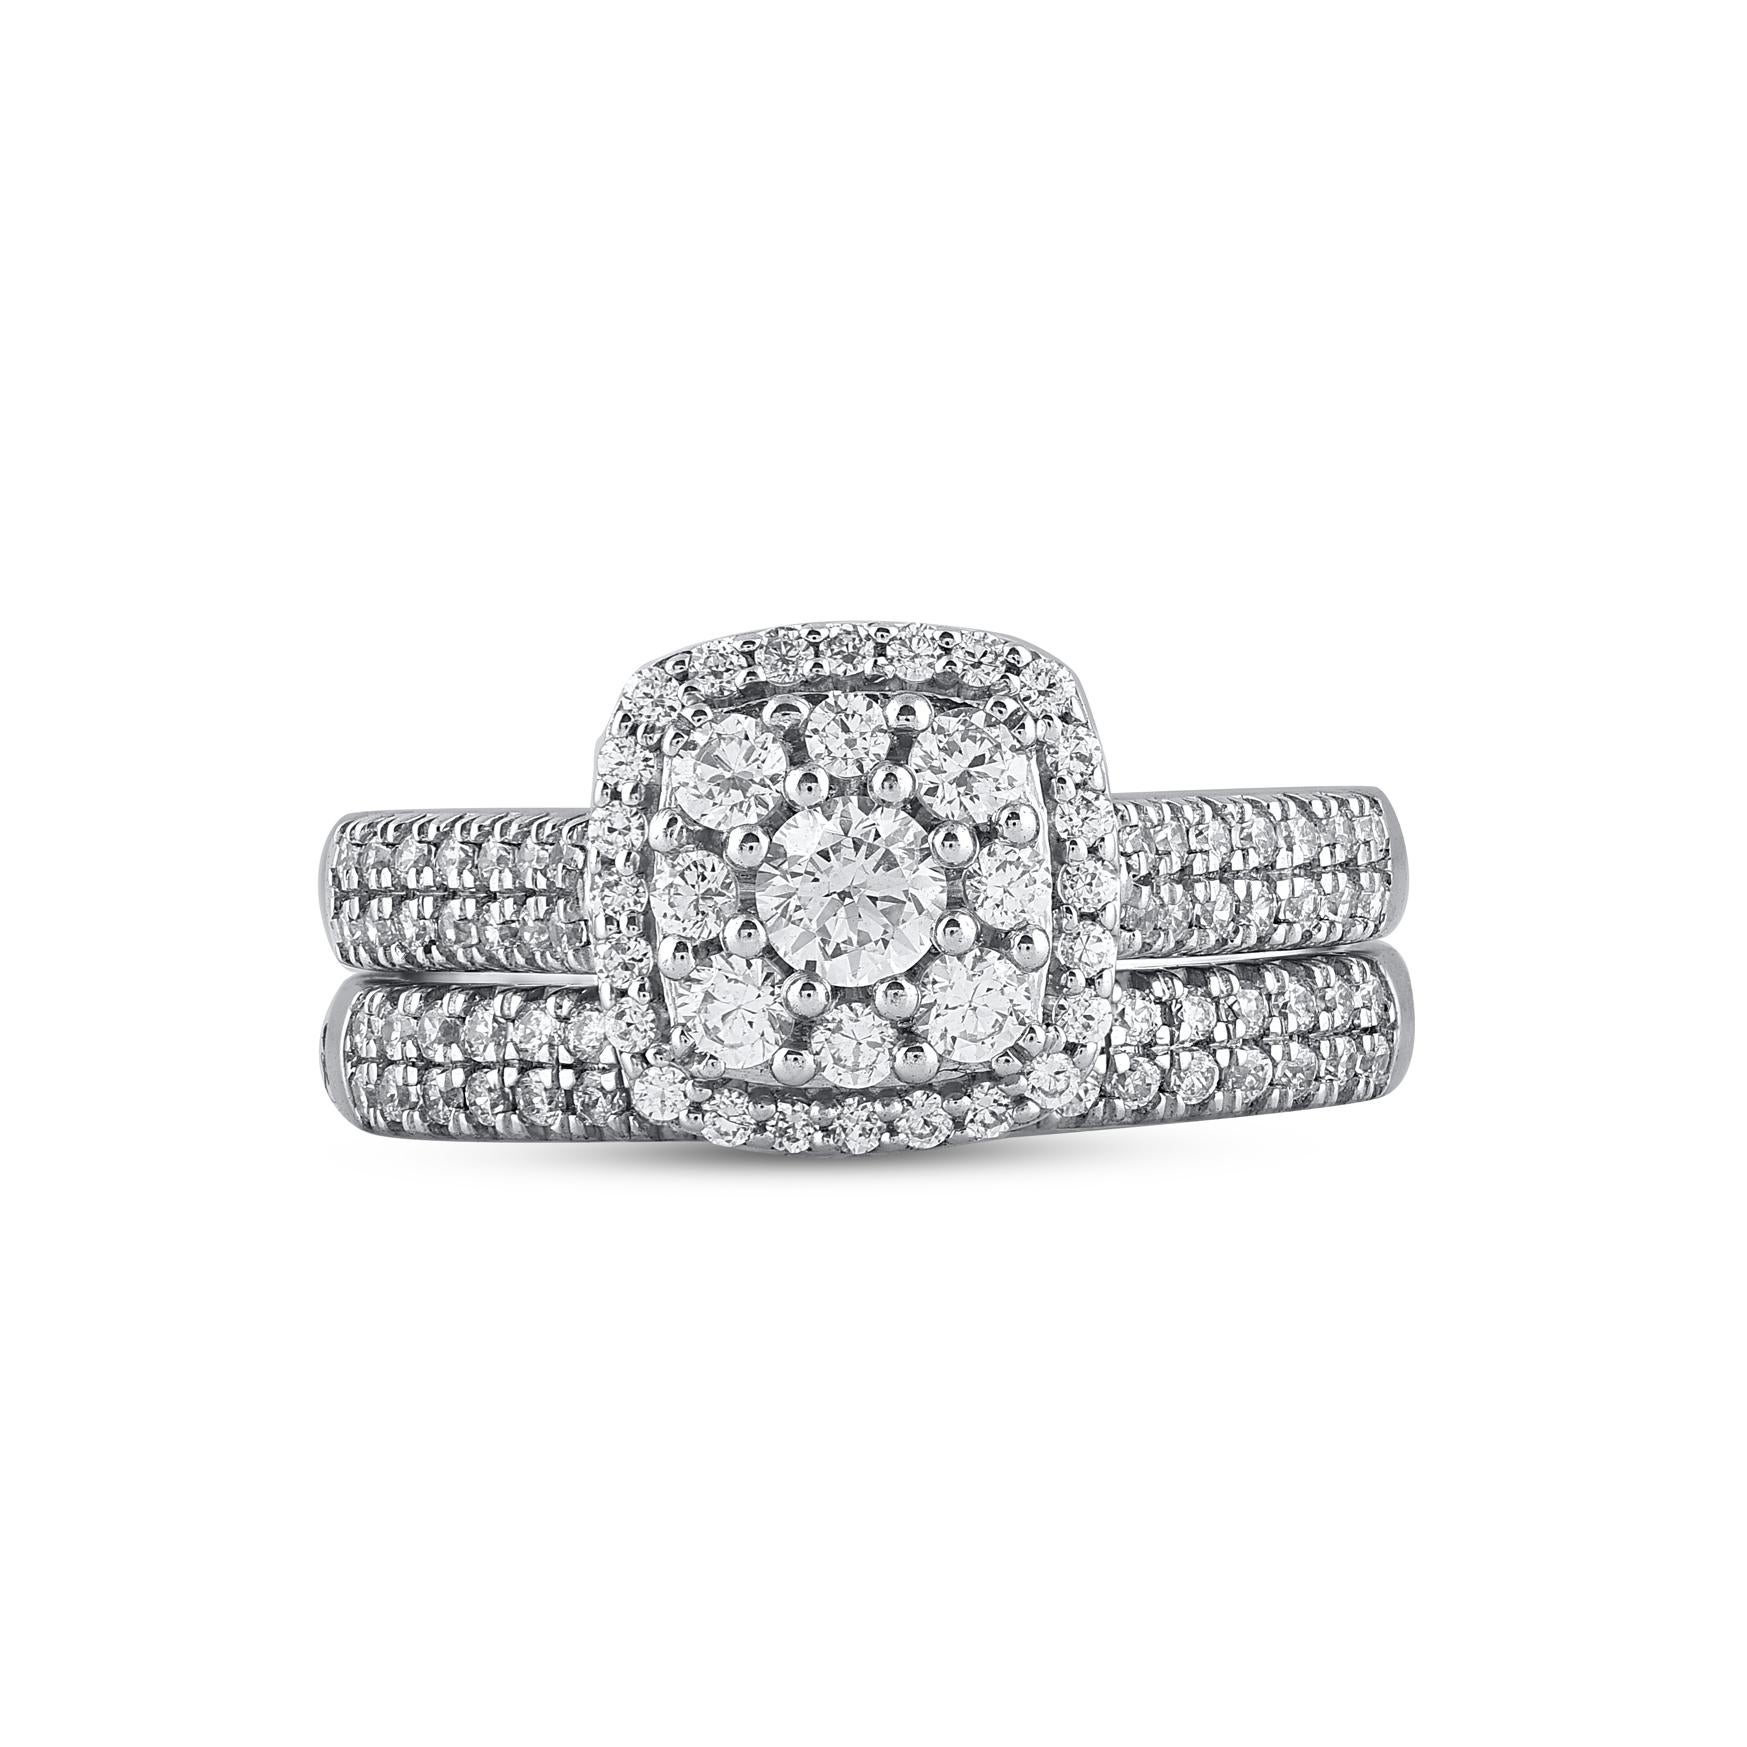 Celebrate every moment of your life with this splendid diamond cushion frame bridal ring set. Crafted in 14 Karat white gold. This wedding ring features a sparkling 99 brilliant cut round diamonds beautifully set in prong and pave setting. The total